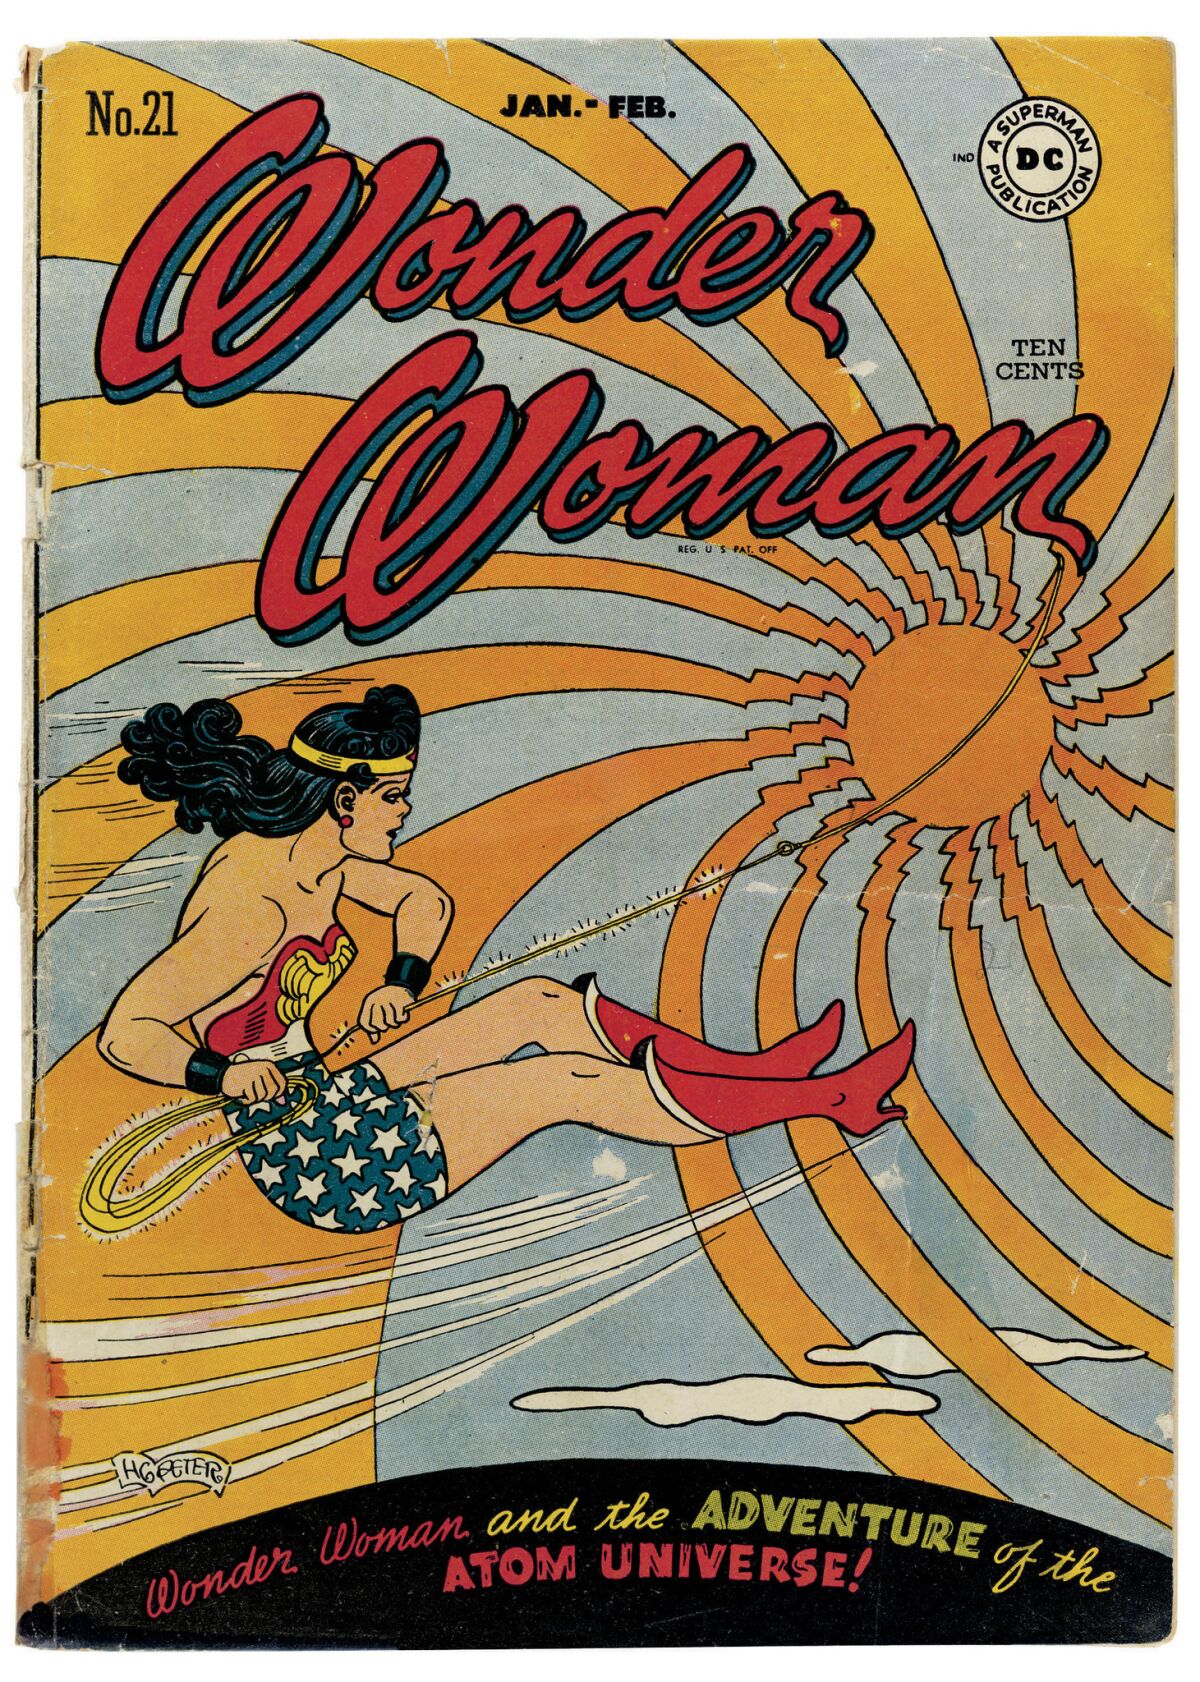 The cover of "Wonder Woman" No. 21 (Jan. - Feb. 1947) by H. G. Peter. (DC Comics)